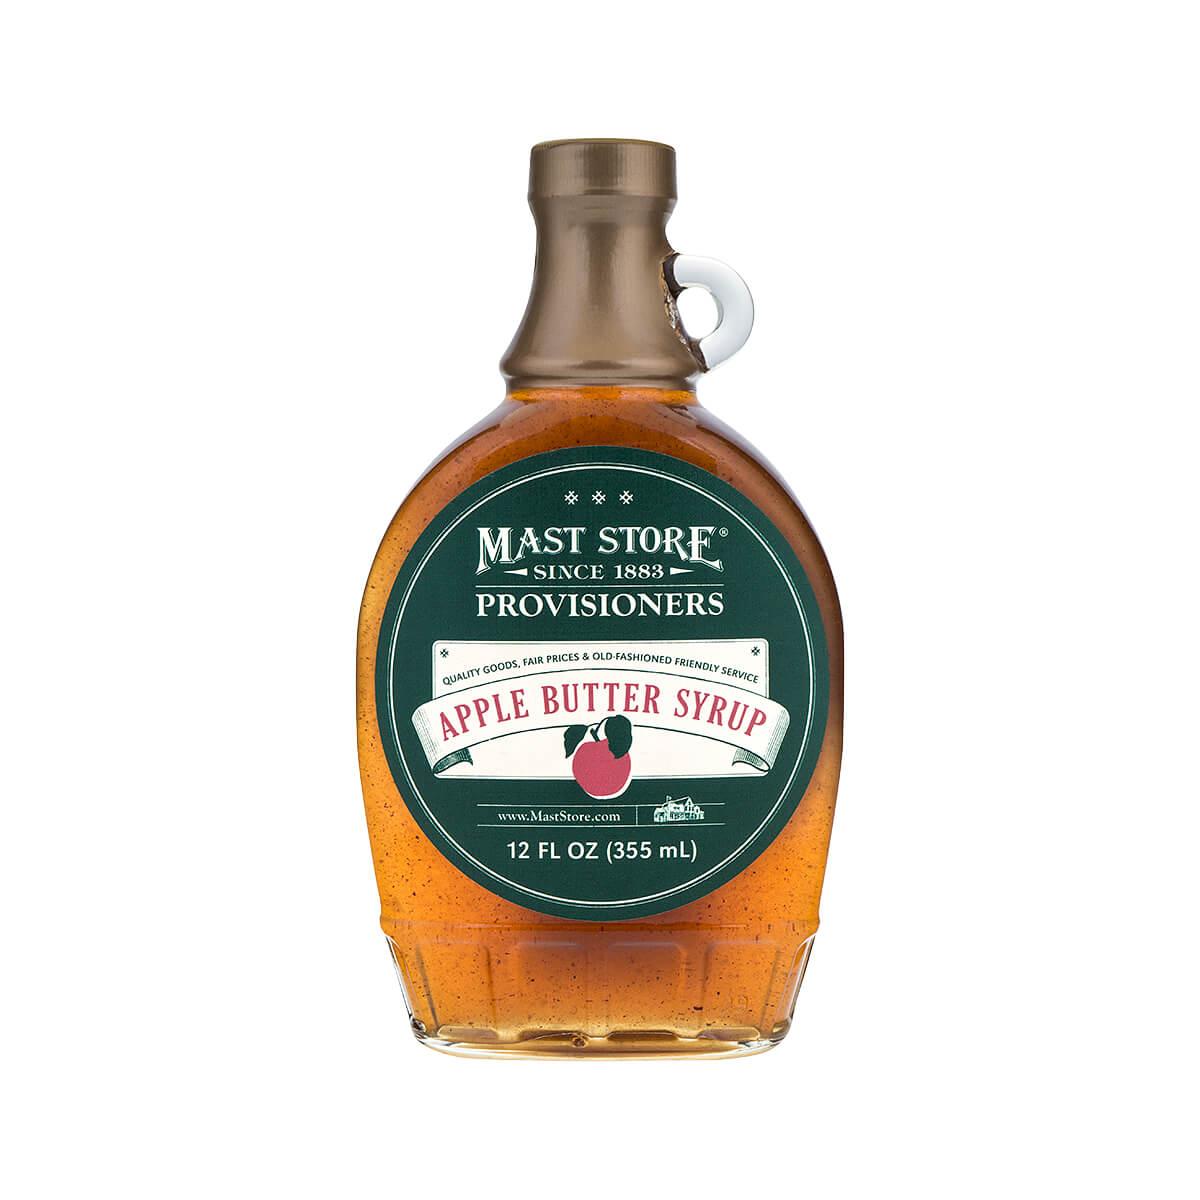  Mast Store Provisioners Apple Butter Syrup